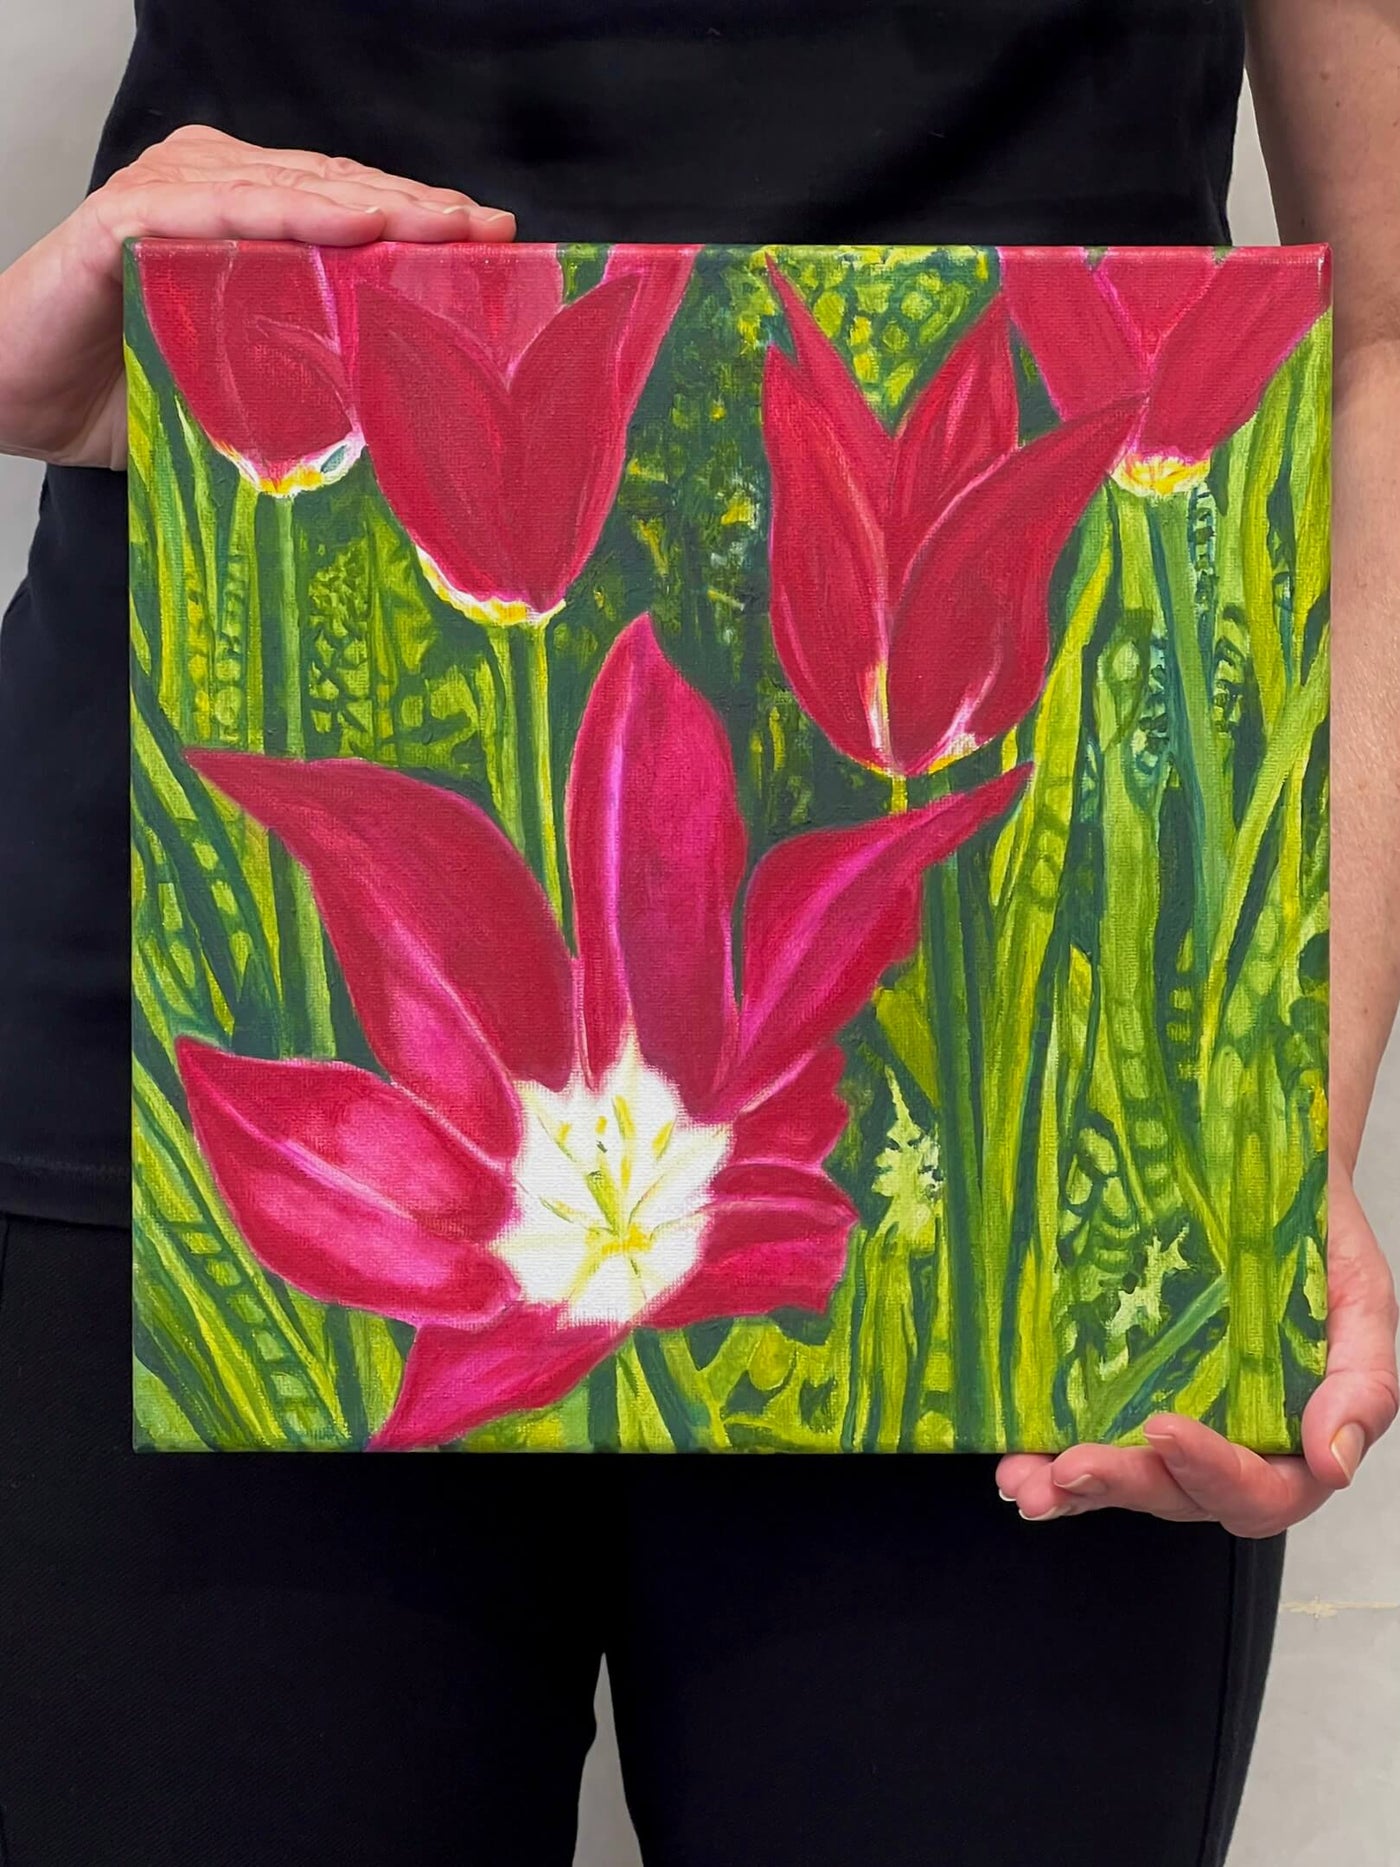 A painting of dark magenta tulips in full bloom, surrounded by a lush, vivid green garden backdrop being held by fine artist Nancy McLennon